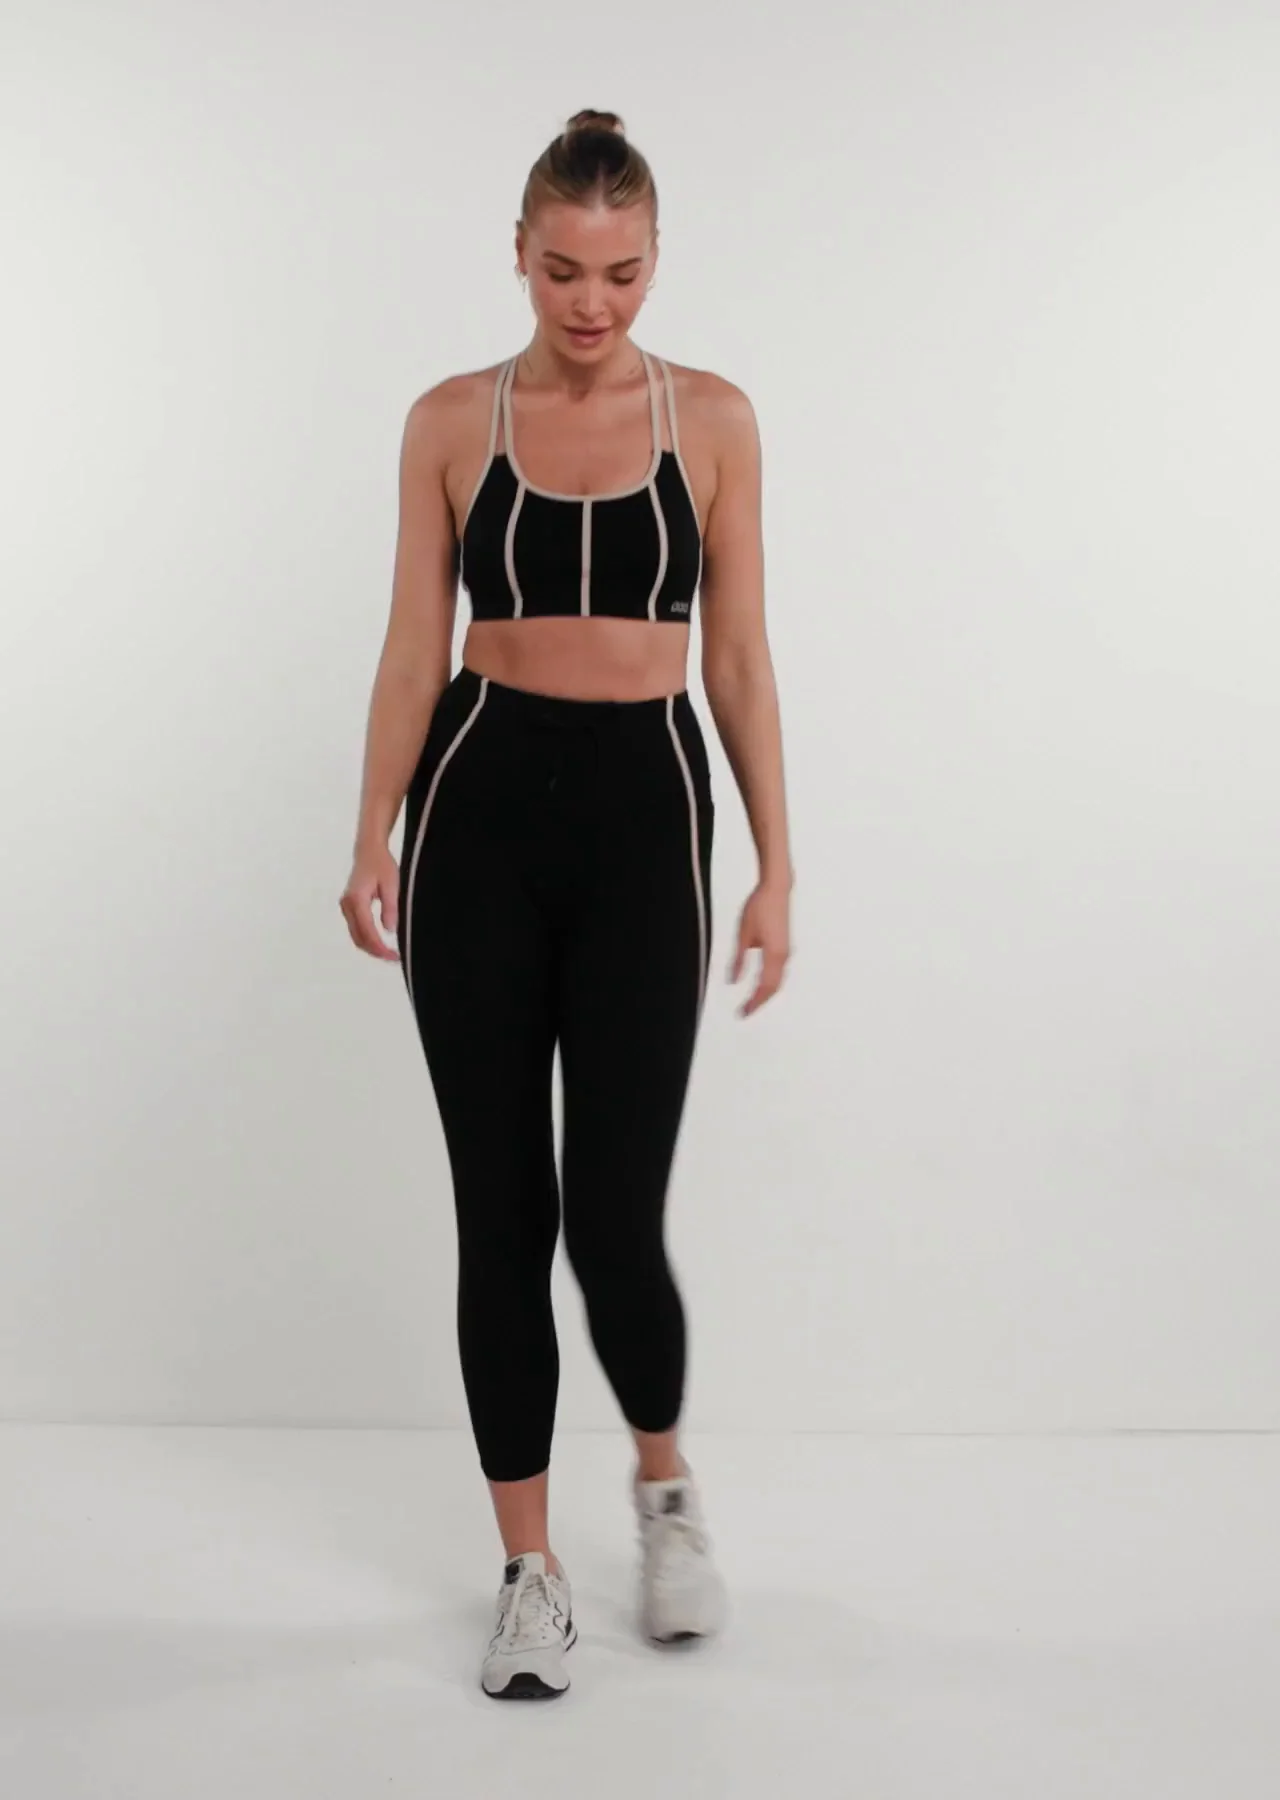 TALA Zinnia high waisted contrast leggings in black exclusive to ASOS